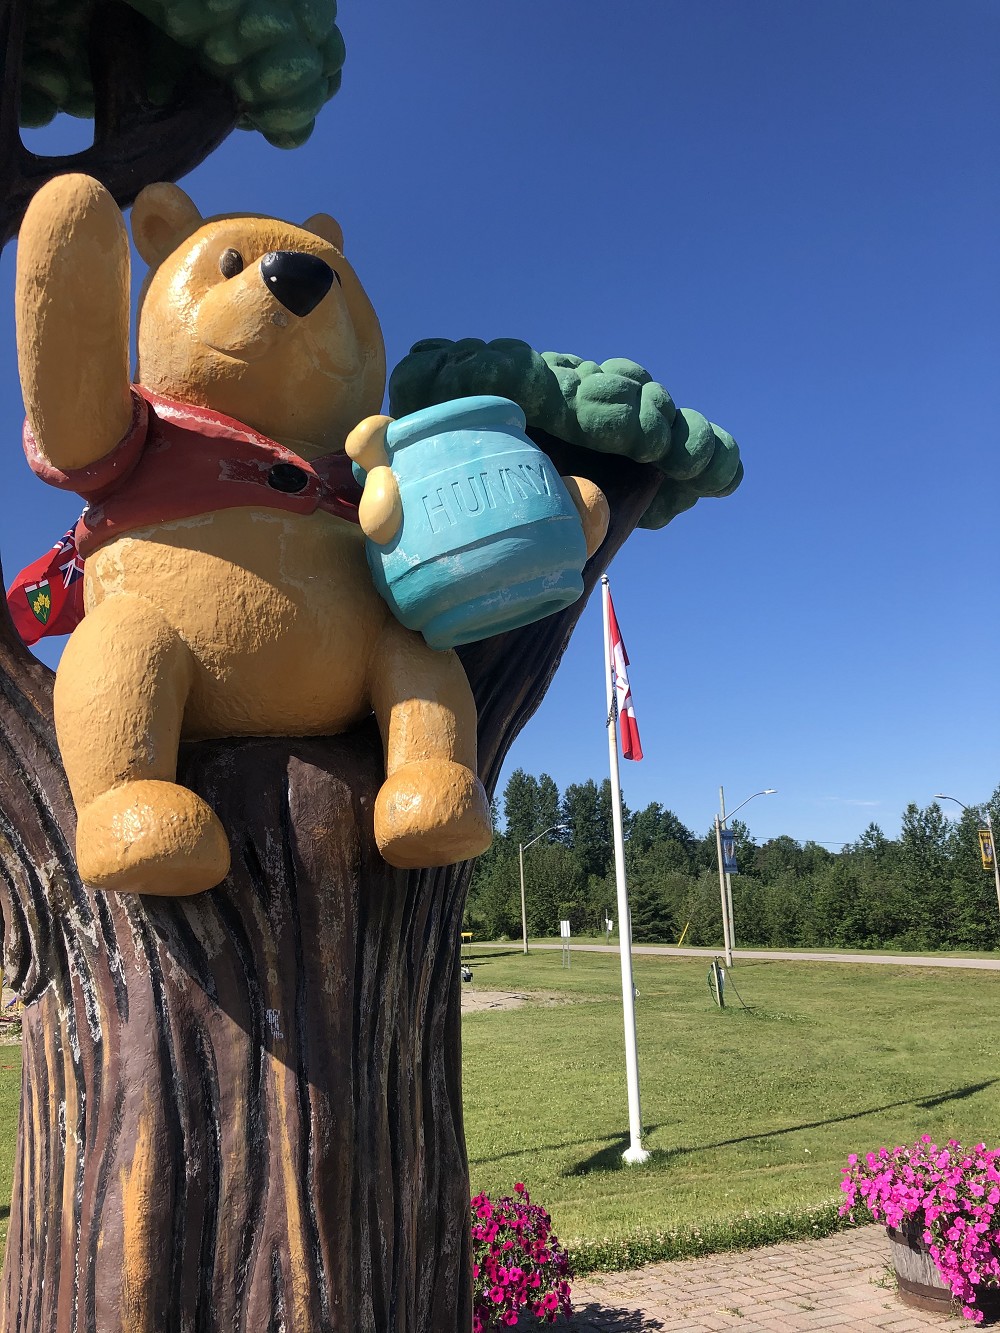 Statue of Winnie The Pooh at Winnie The Pooh Park